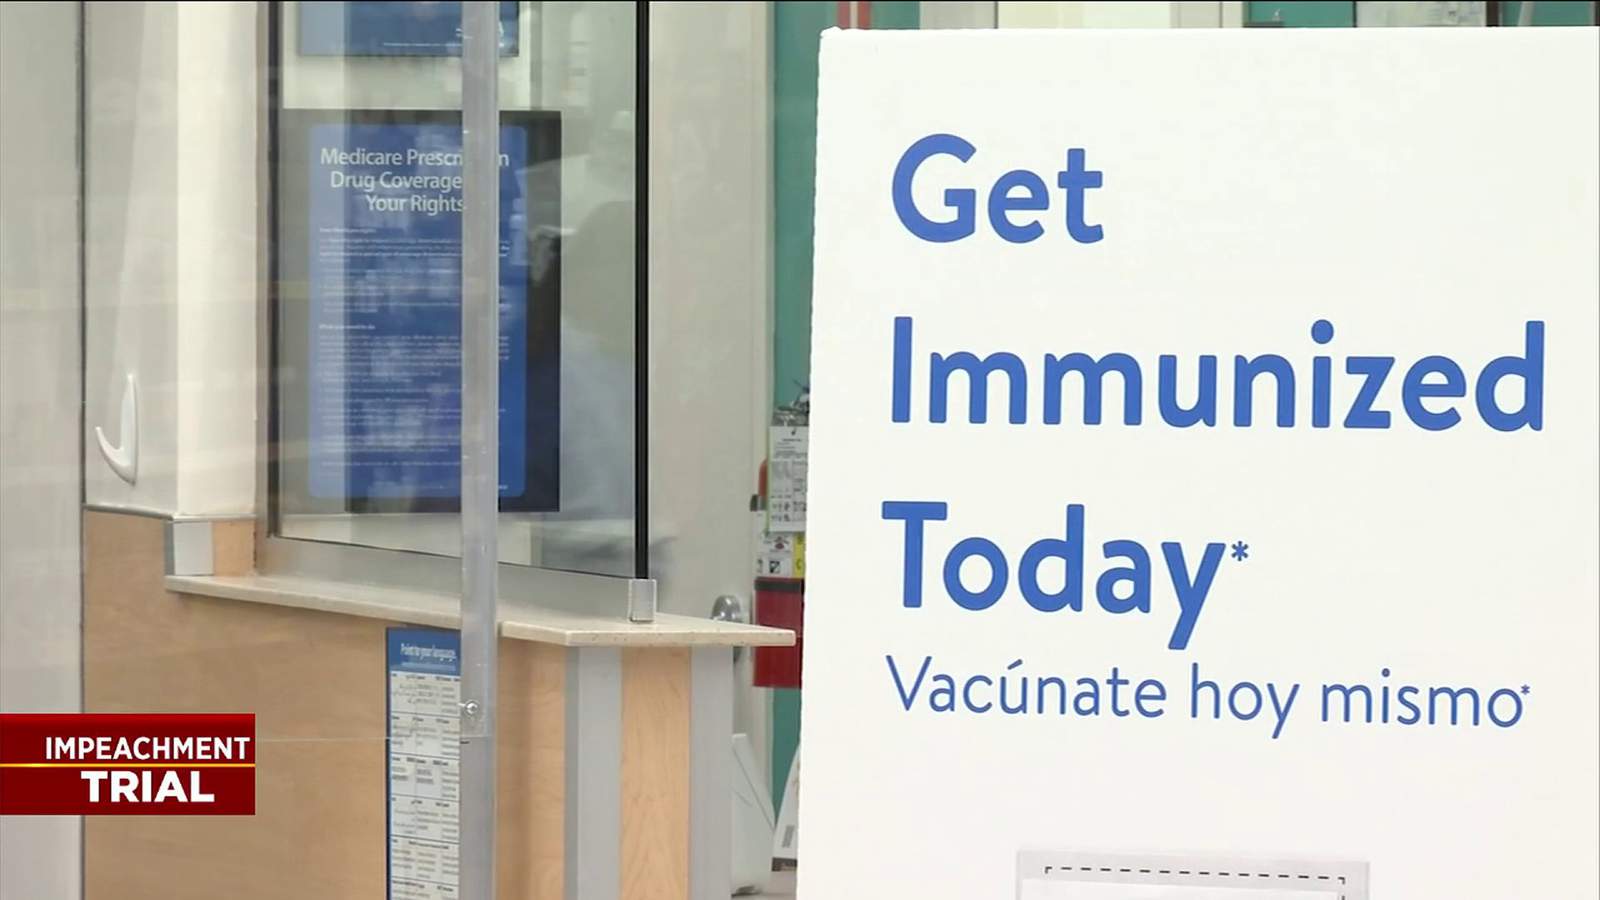 JTA working to improve access to Jacksonville vaccination sites